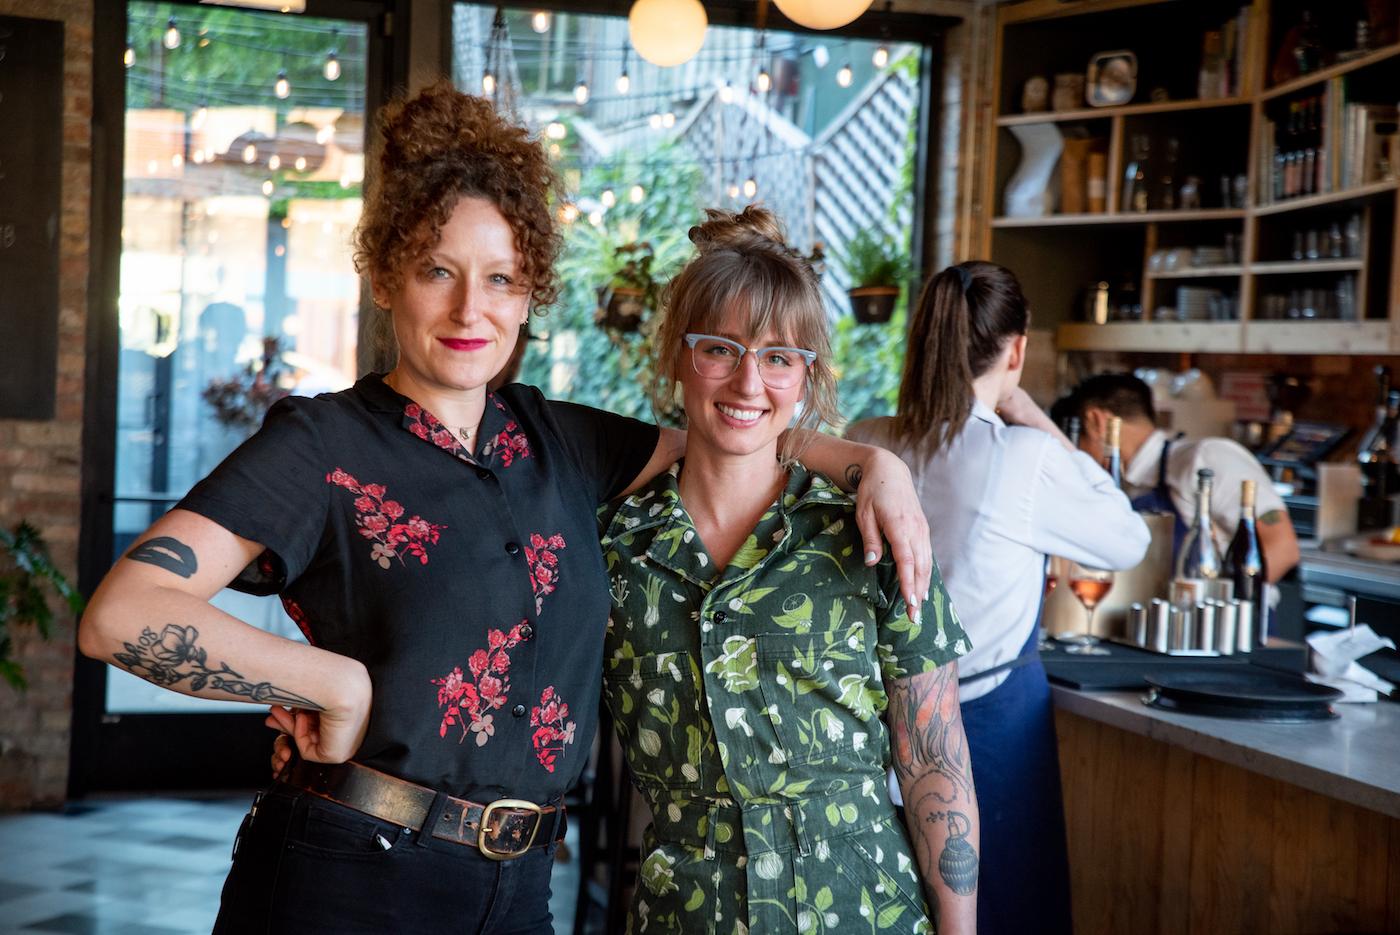 From left, general manager Jessica Line, 36, and Tayler Ploshehanski, 33, at Wherewithall at 3472 N. Elston Ave. in Chicago, Illinois. Photo: WTTW/Kathleen Hinkel